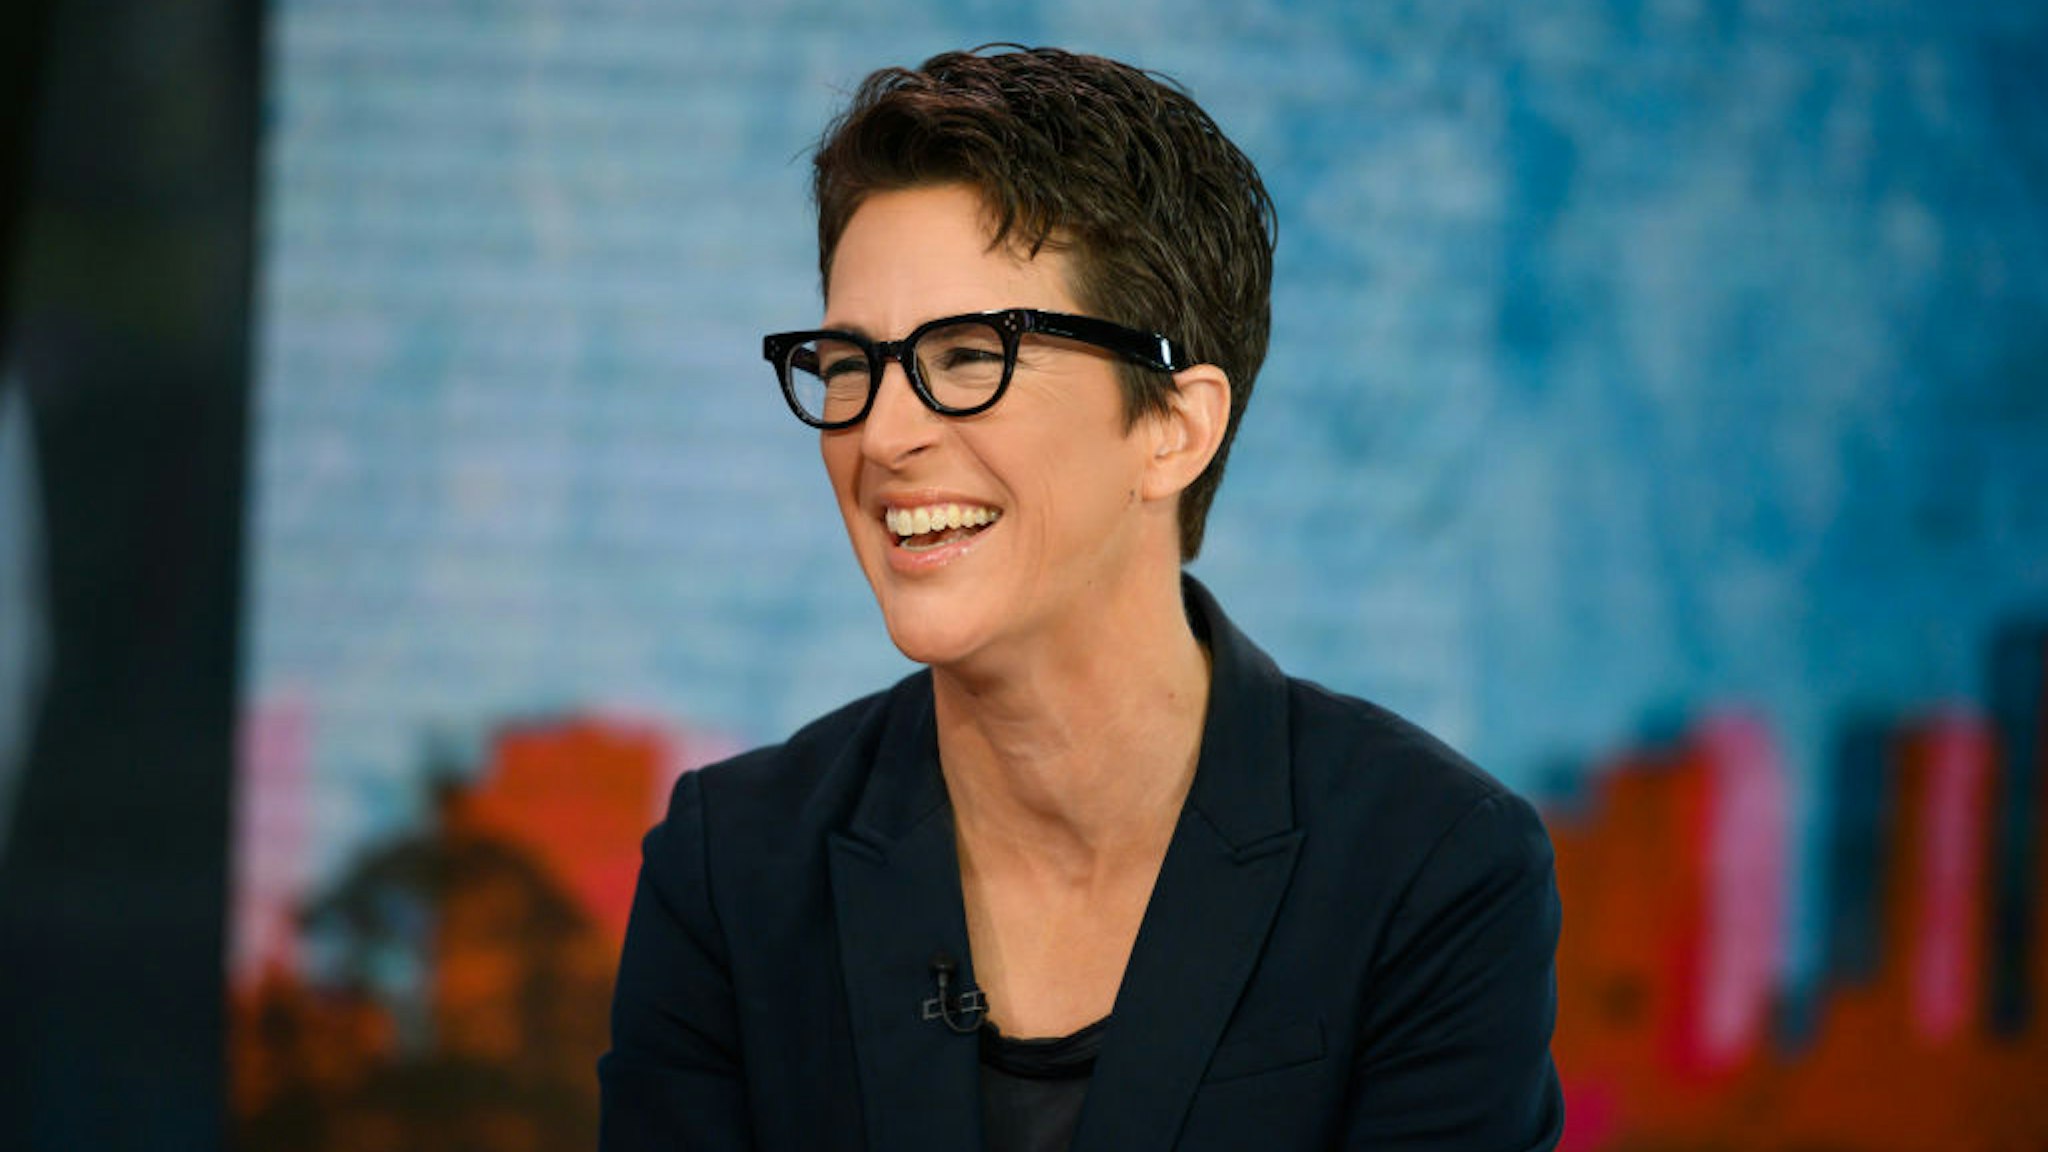 TODAY -- Pictured: Rachel Maddow on Tuesday, October 2, 2019